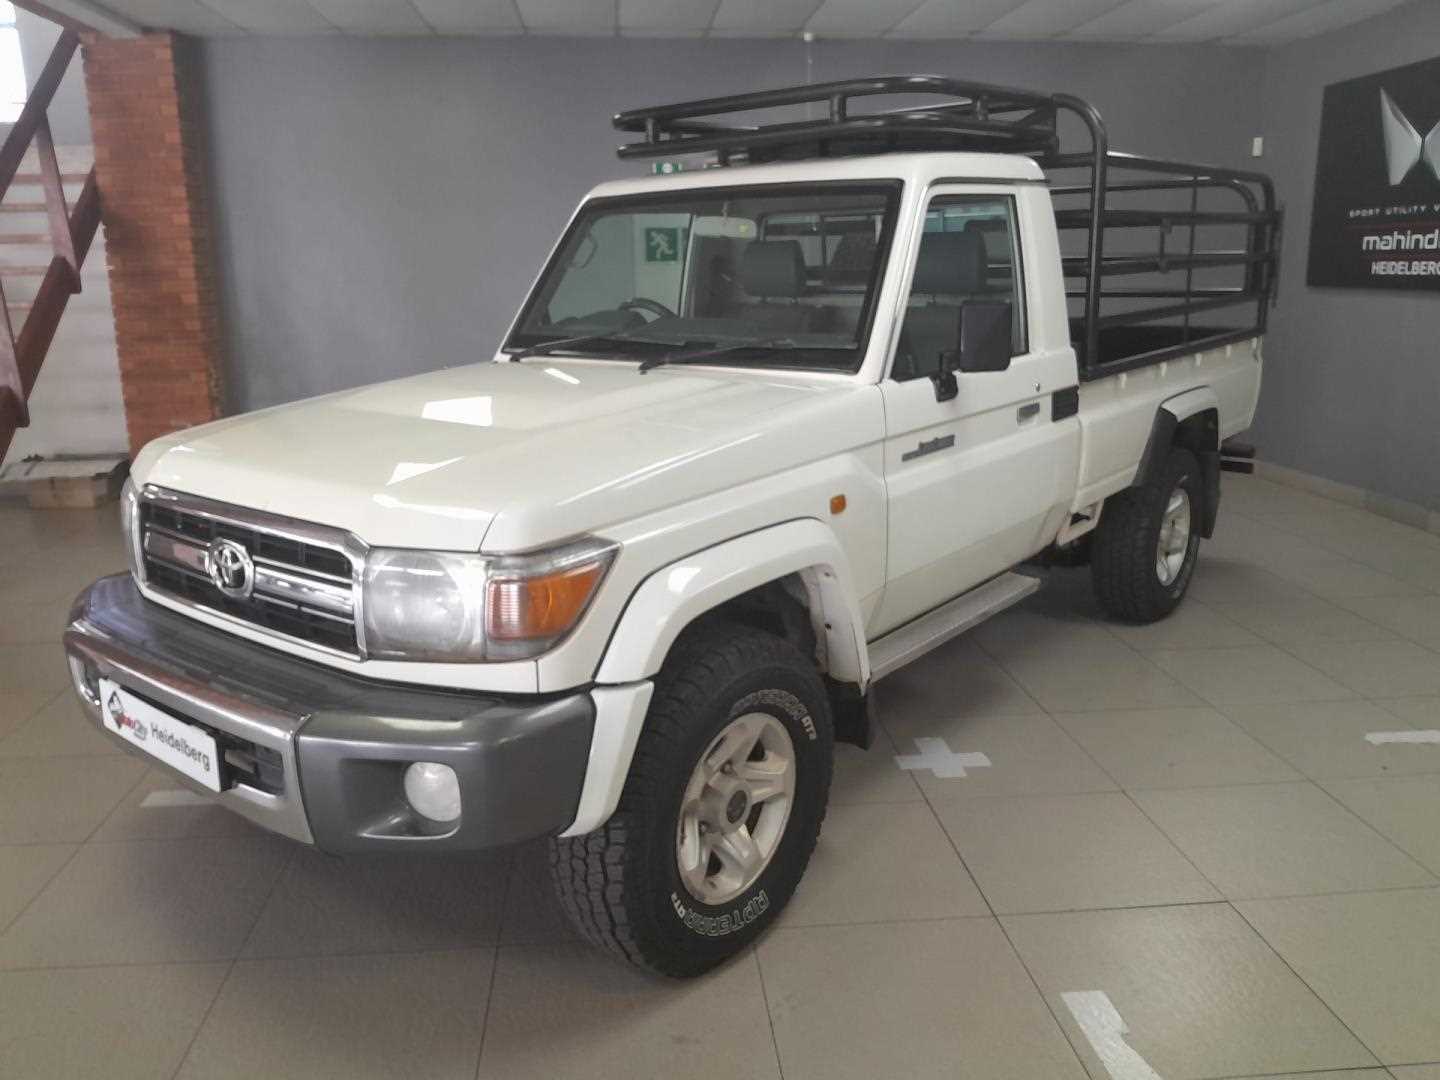 Toyota LAND CRUISER 79 4.2D P/U S/C for Sale in South Africa